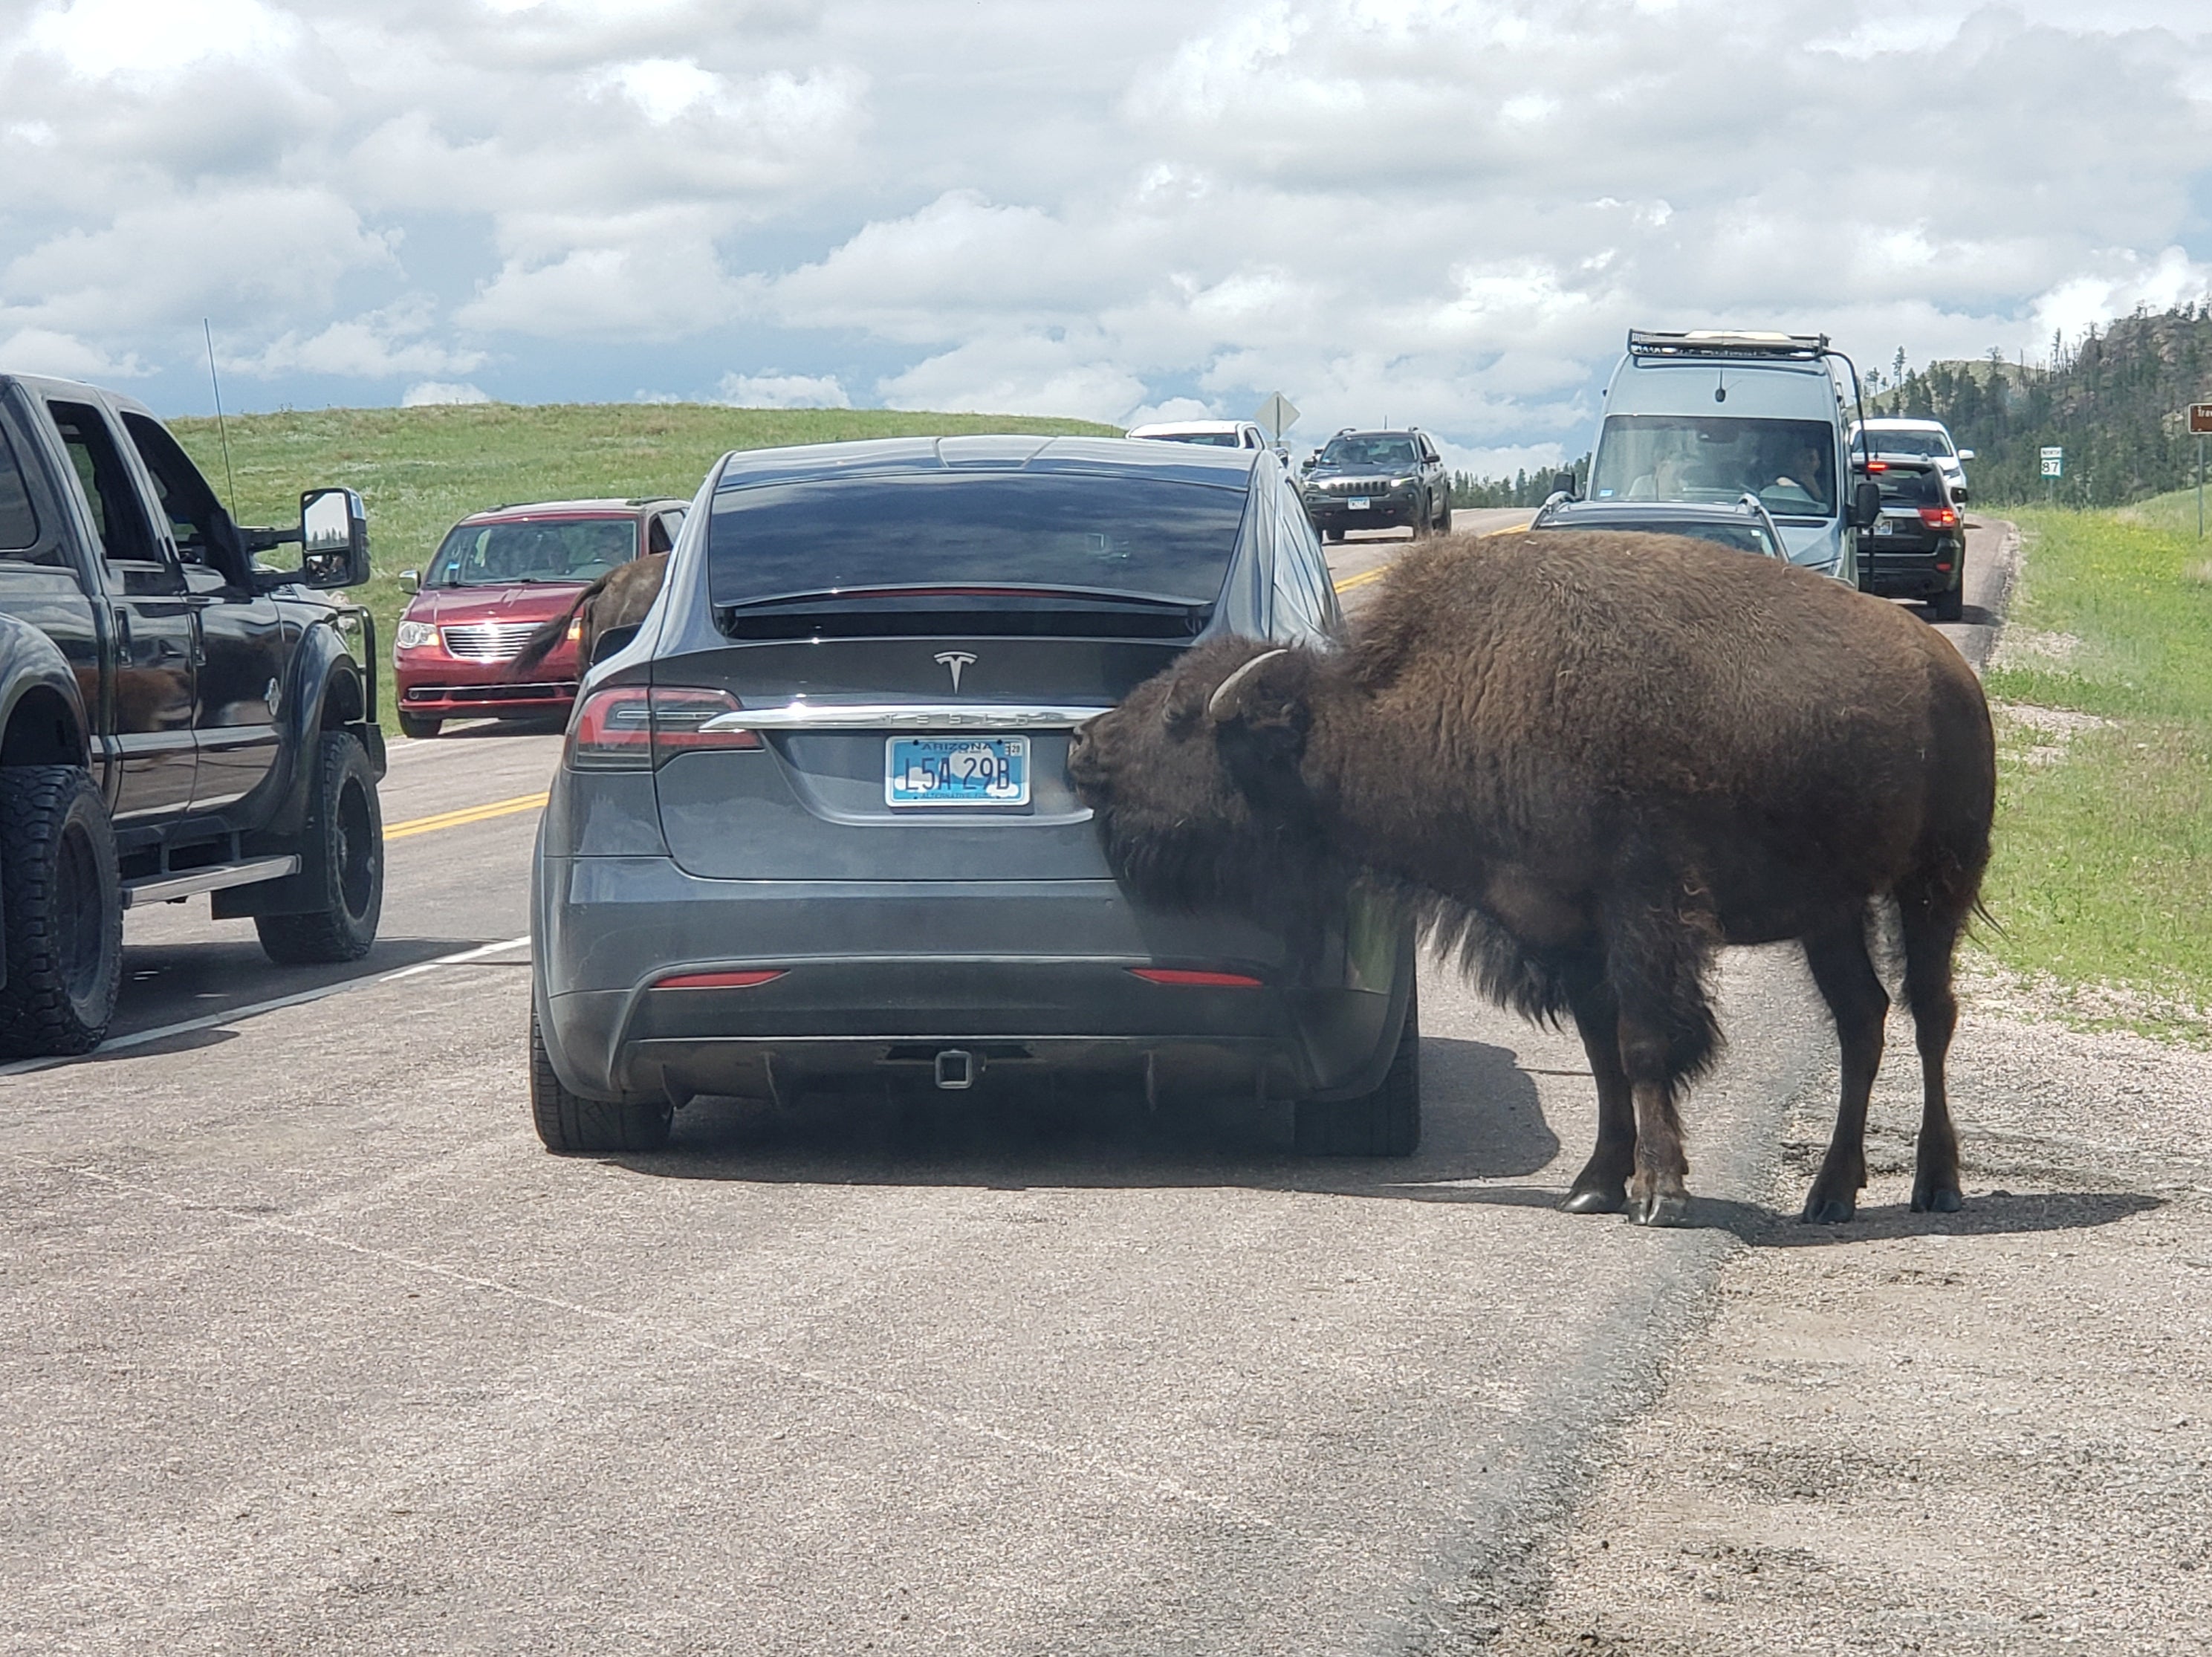 Too close for comfort: A curious bison